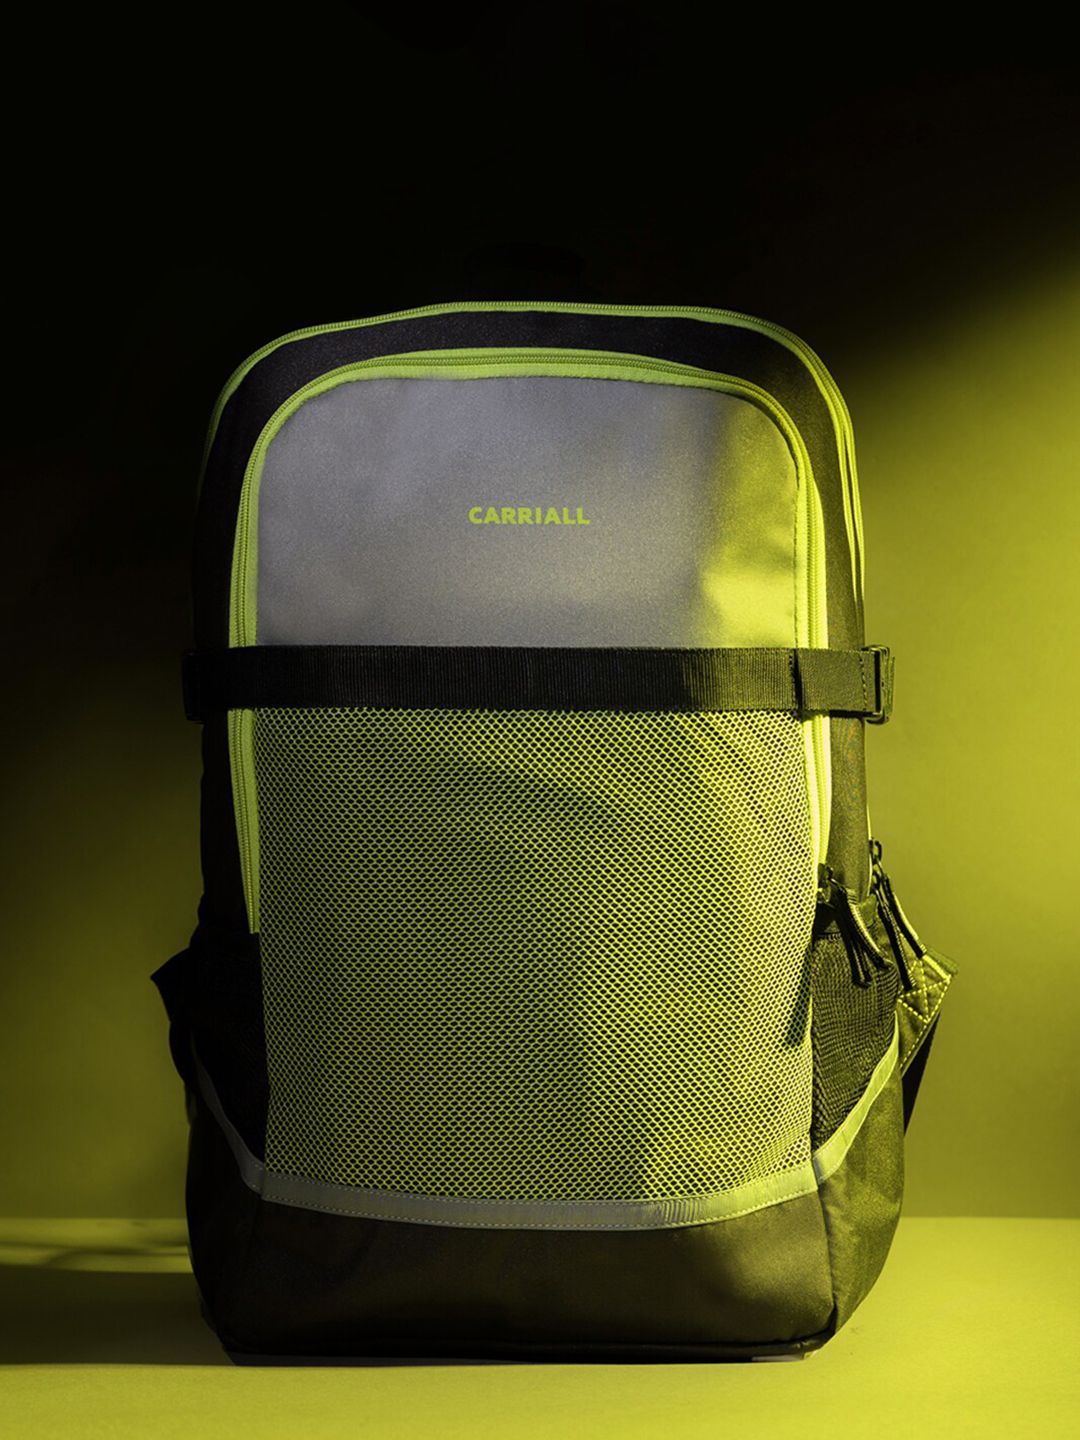 CARRIALL Unisex Yellow & Black Colourblocked Backpack Price in India